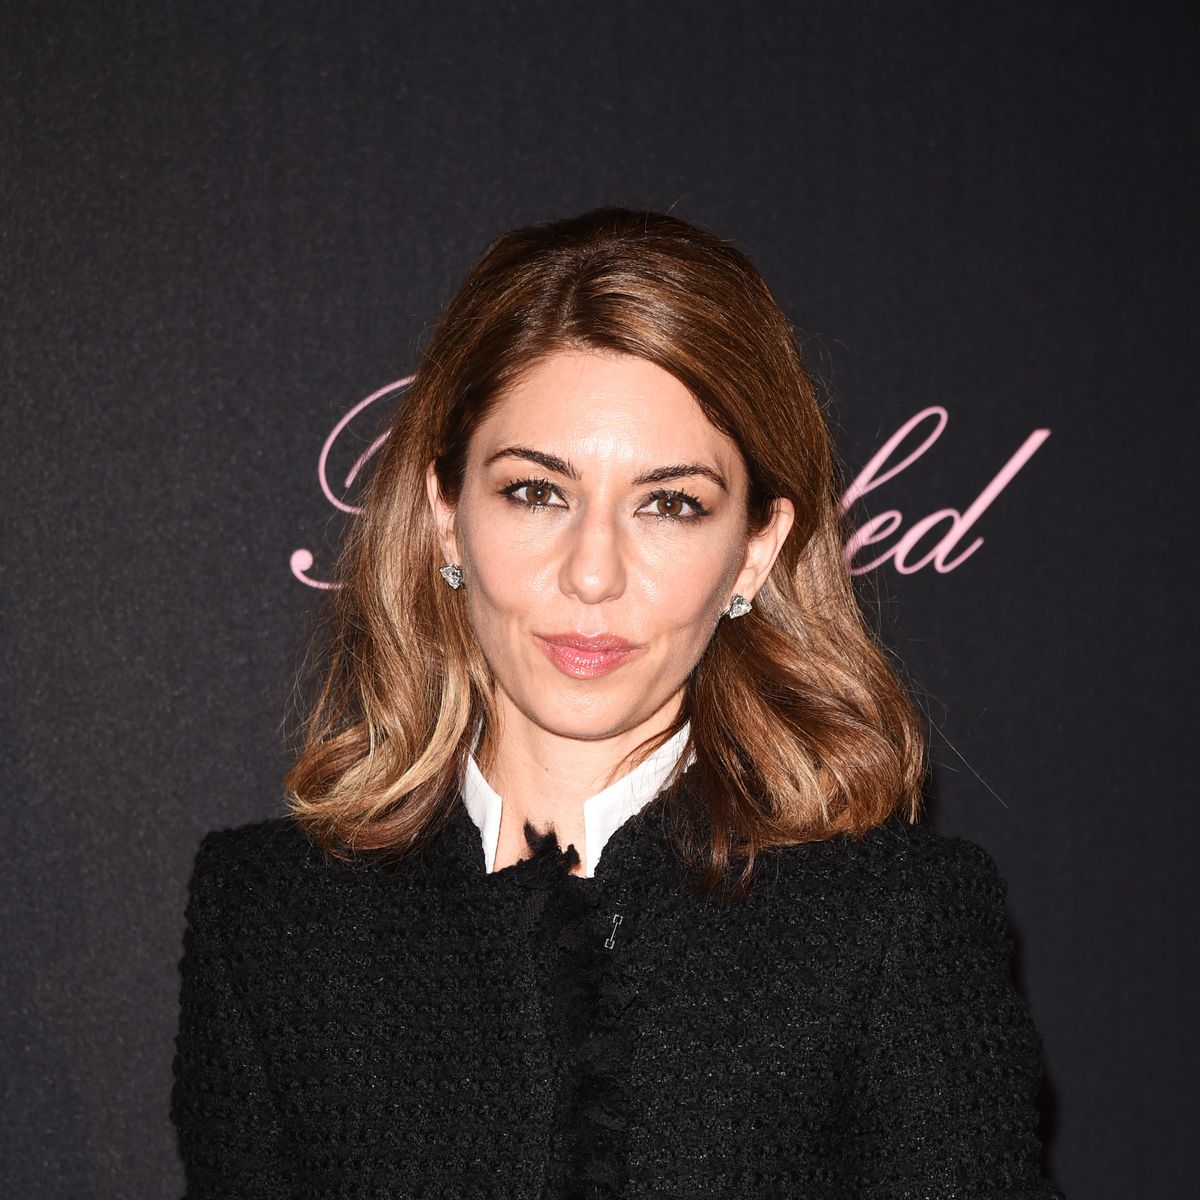 Sofia Coppola Is First Female Director In Over 50 Years To Win At Cannes